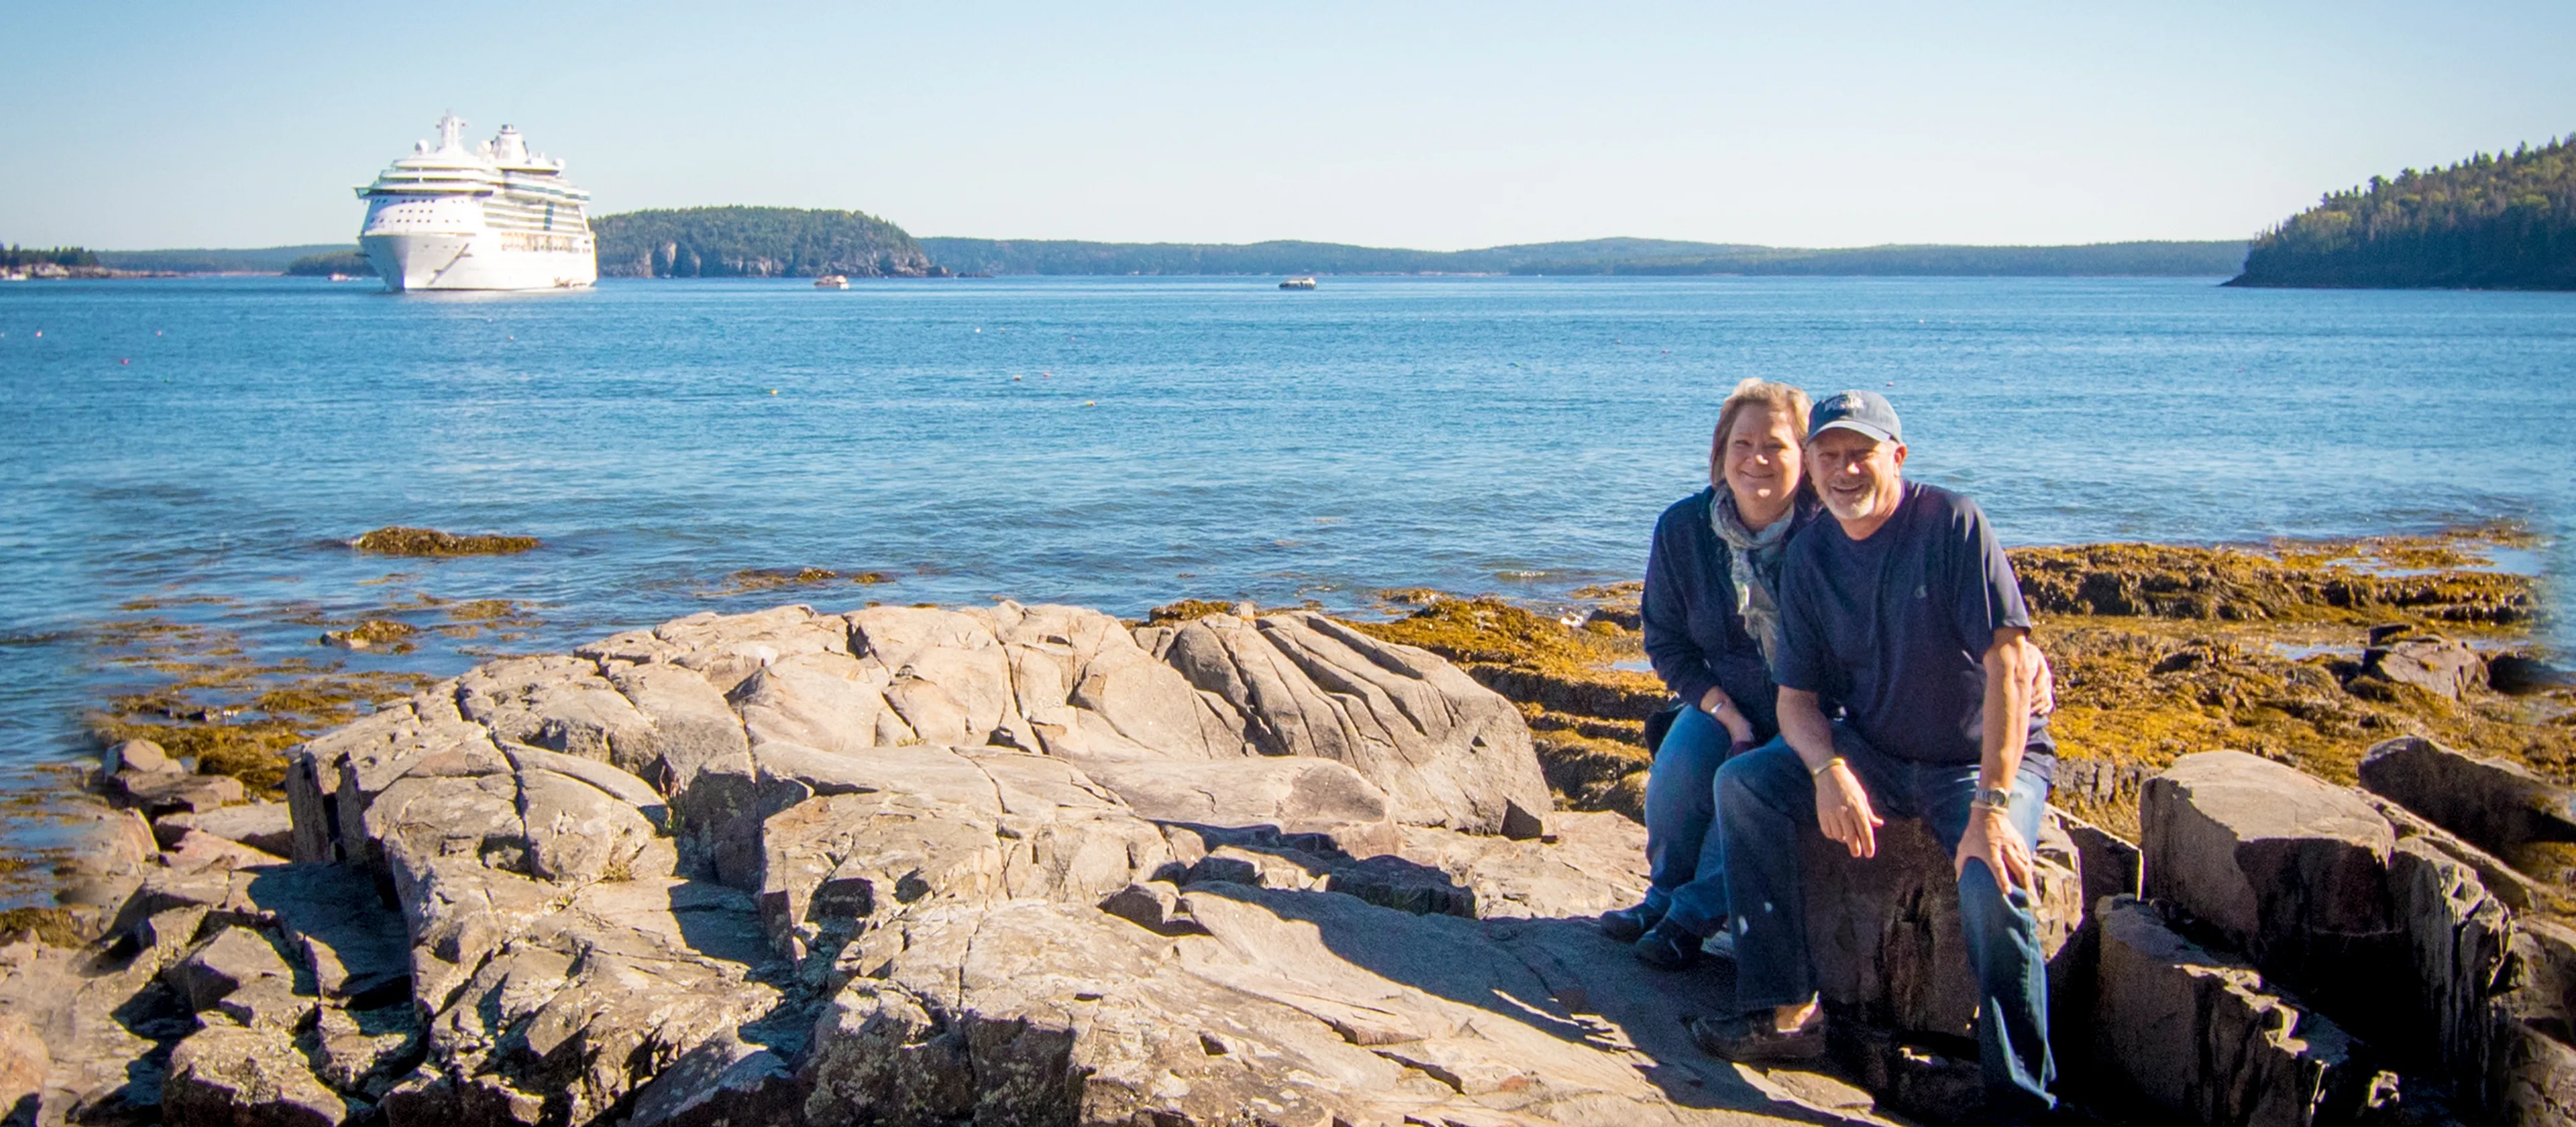 A couple sitting together on the rocky shore of the ocean